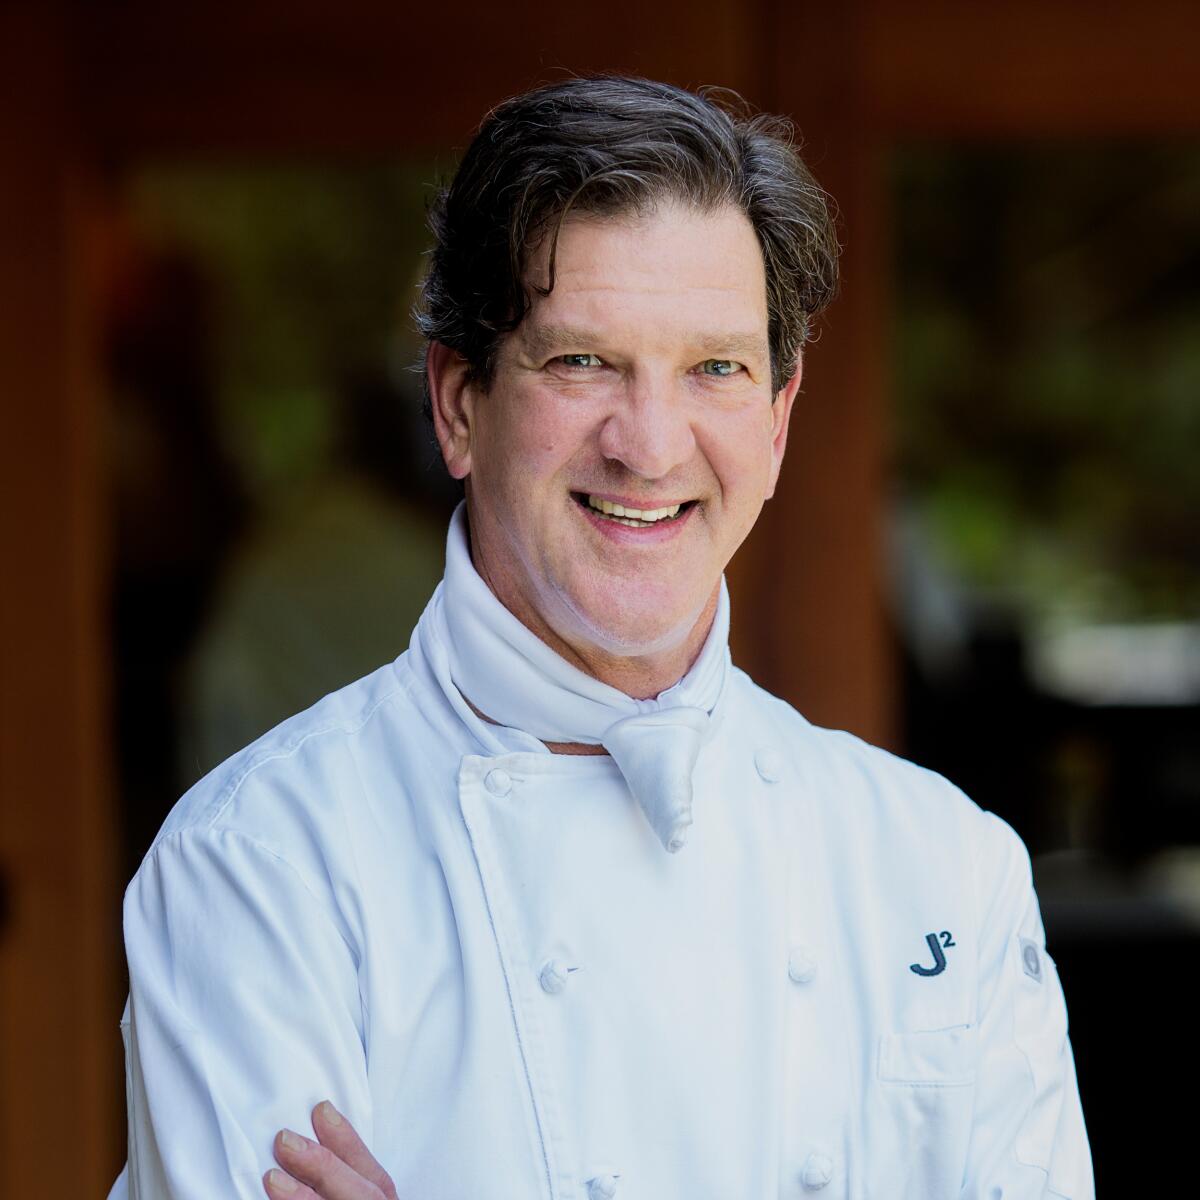 Jeff Jackson has moved into a new corporate role after more than 20 years as executive chef at The Lodge at Torrey Pines.